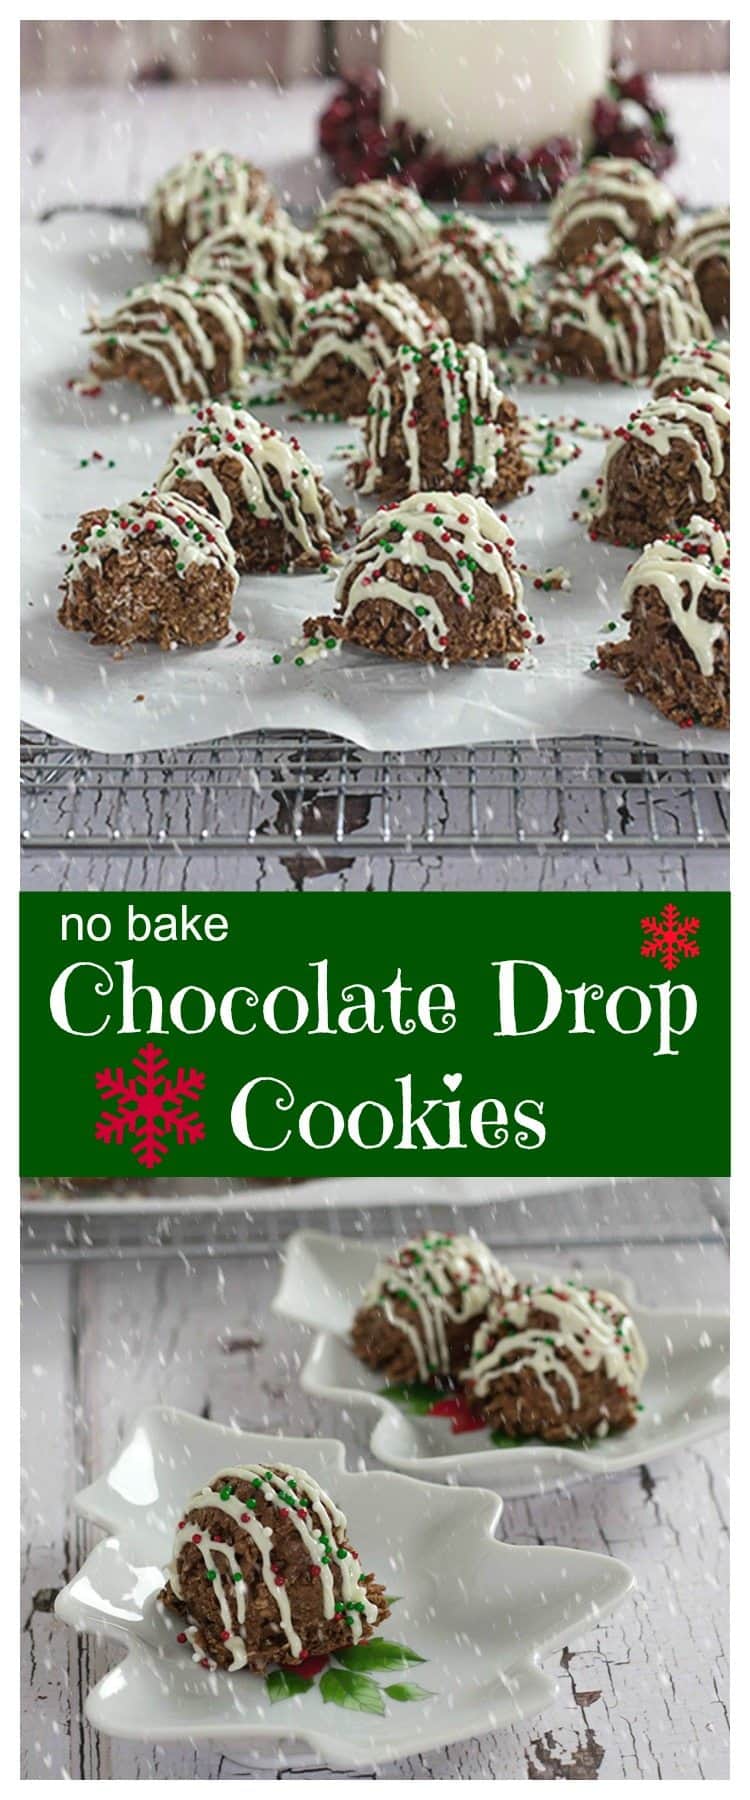 These easy No Bake Chocolate Drop Cookies with oatmeal and coconut are an explosion of chocolate-y goodness in your mouth. Just sayin....